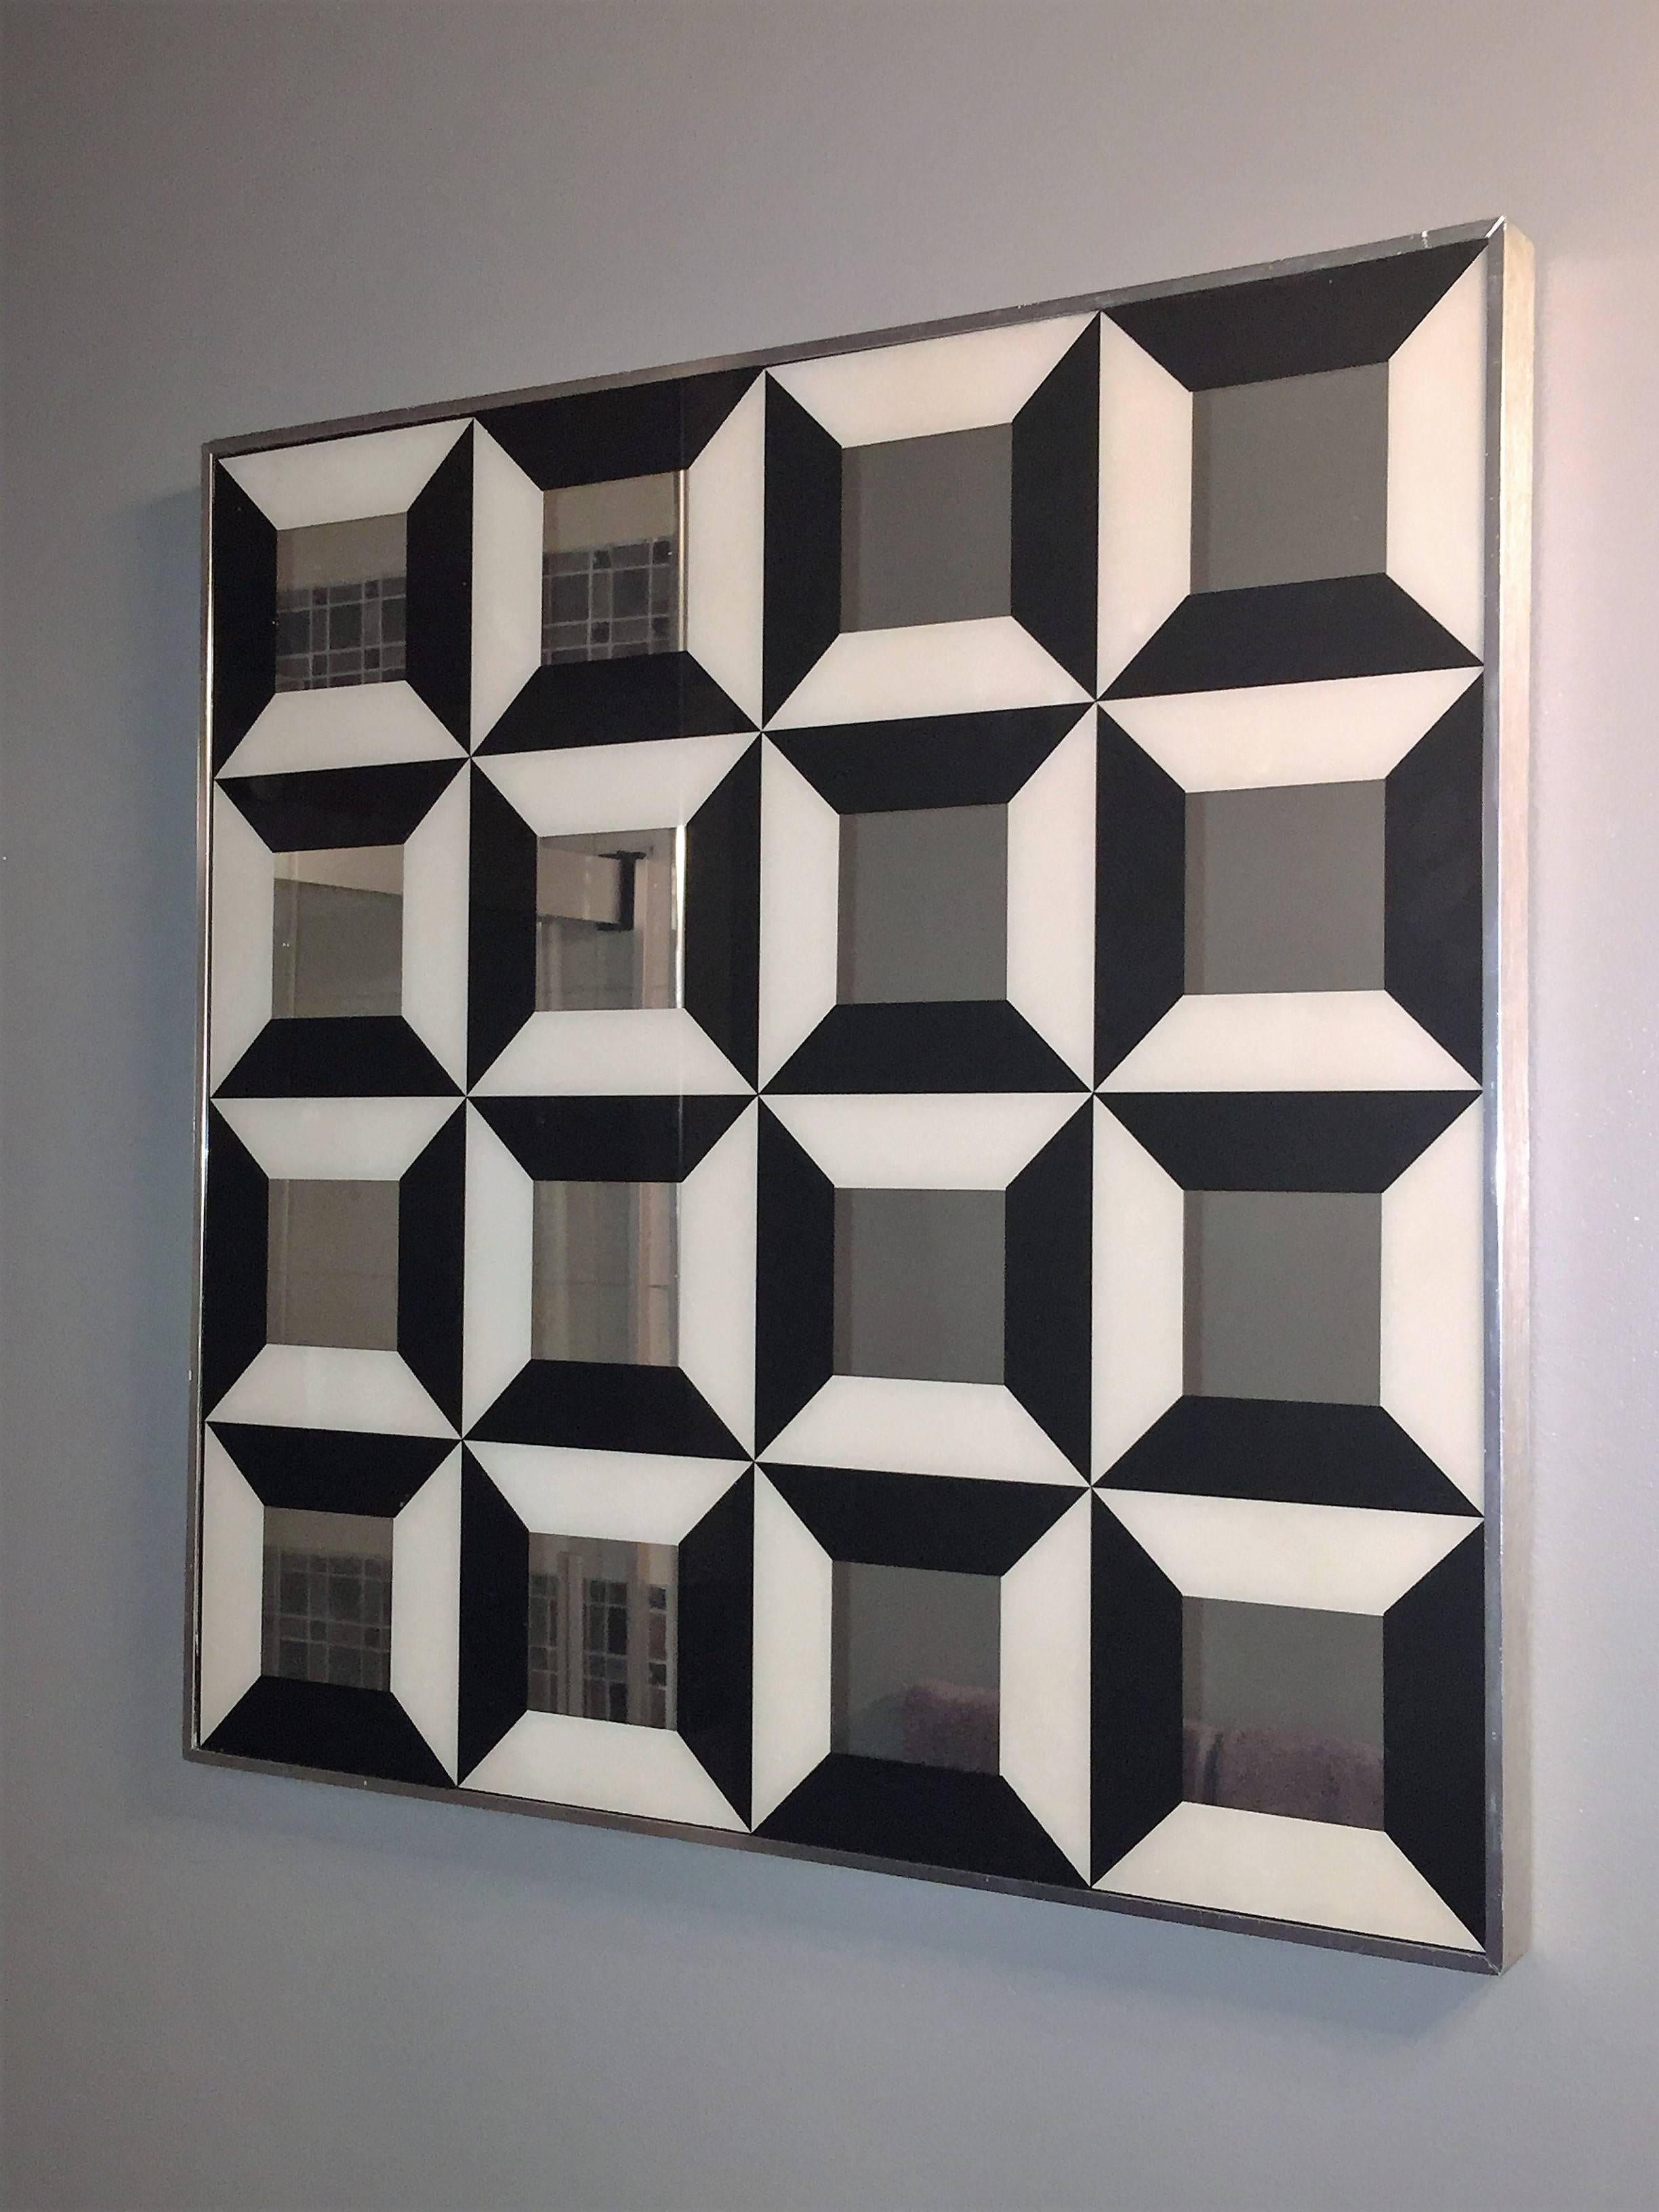 Mod 1970s black and white square repeating design optical mirror set in an brushed aluminum frame designed by Verner Panton.